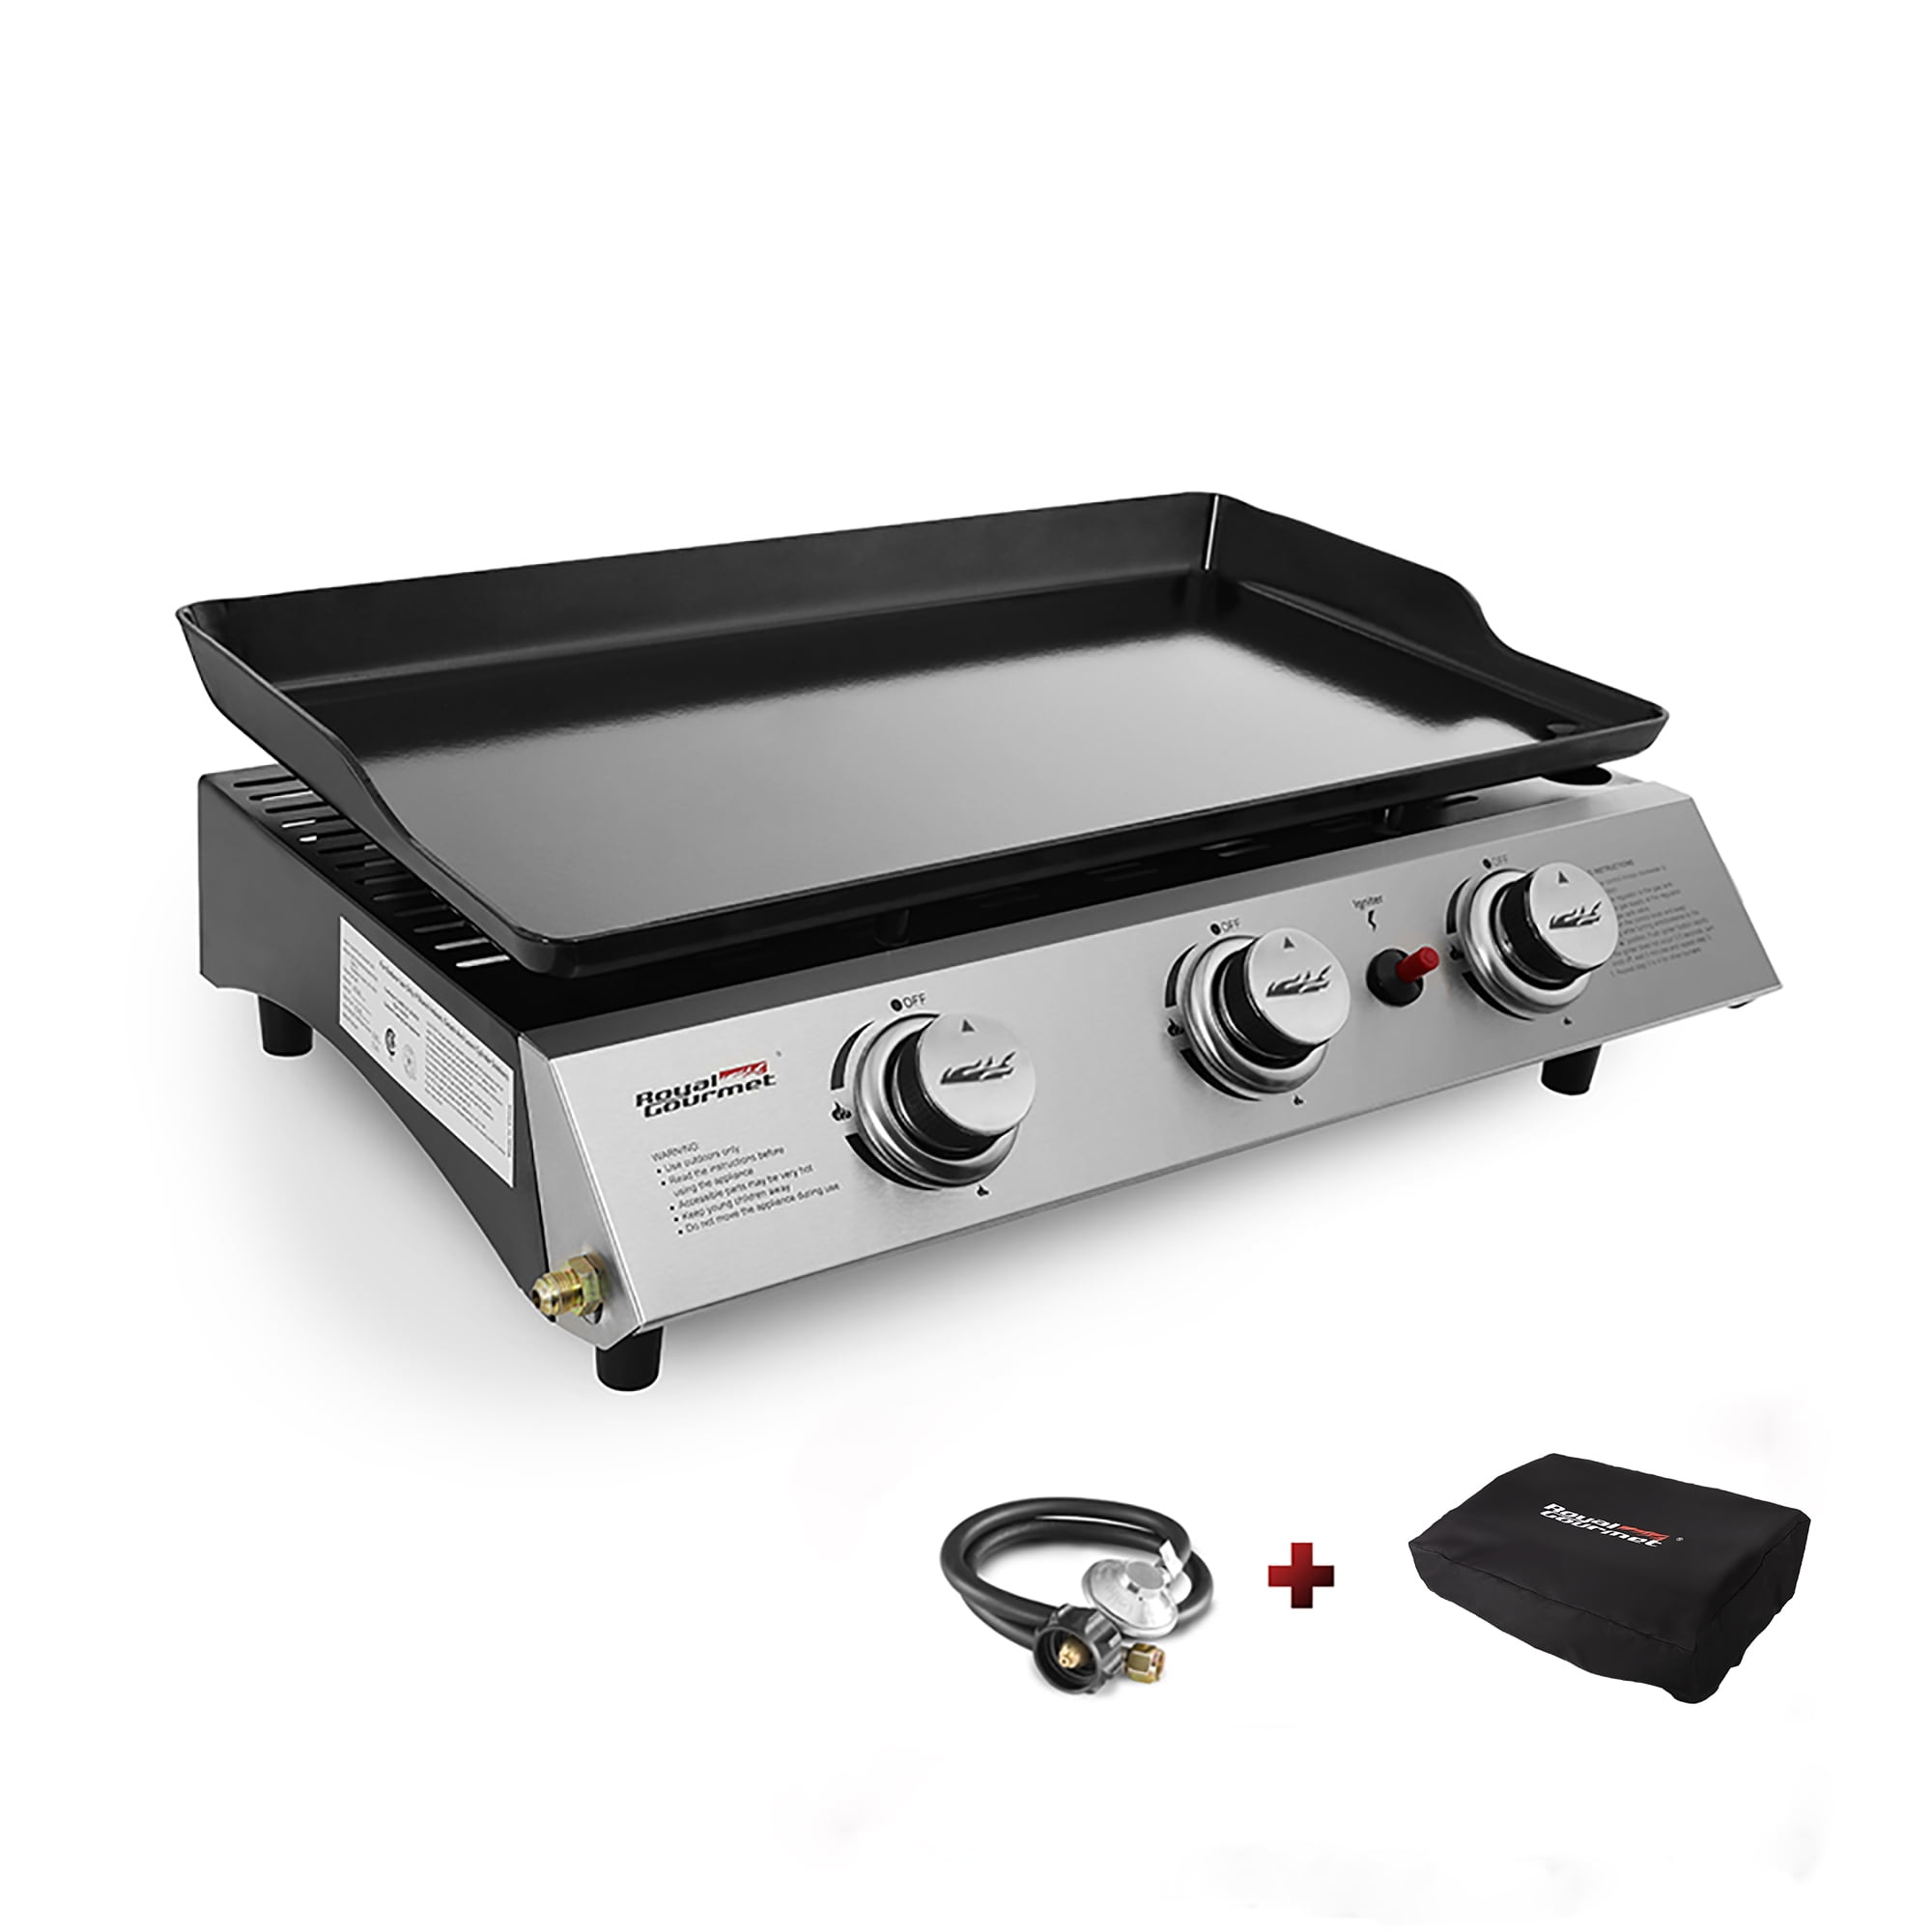 Royal Gourmet PD1300 3-Burner 26,400-BTU Portable Gas Grill Griddle, Outdoor Camping, Tailgating